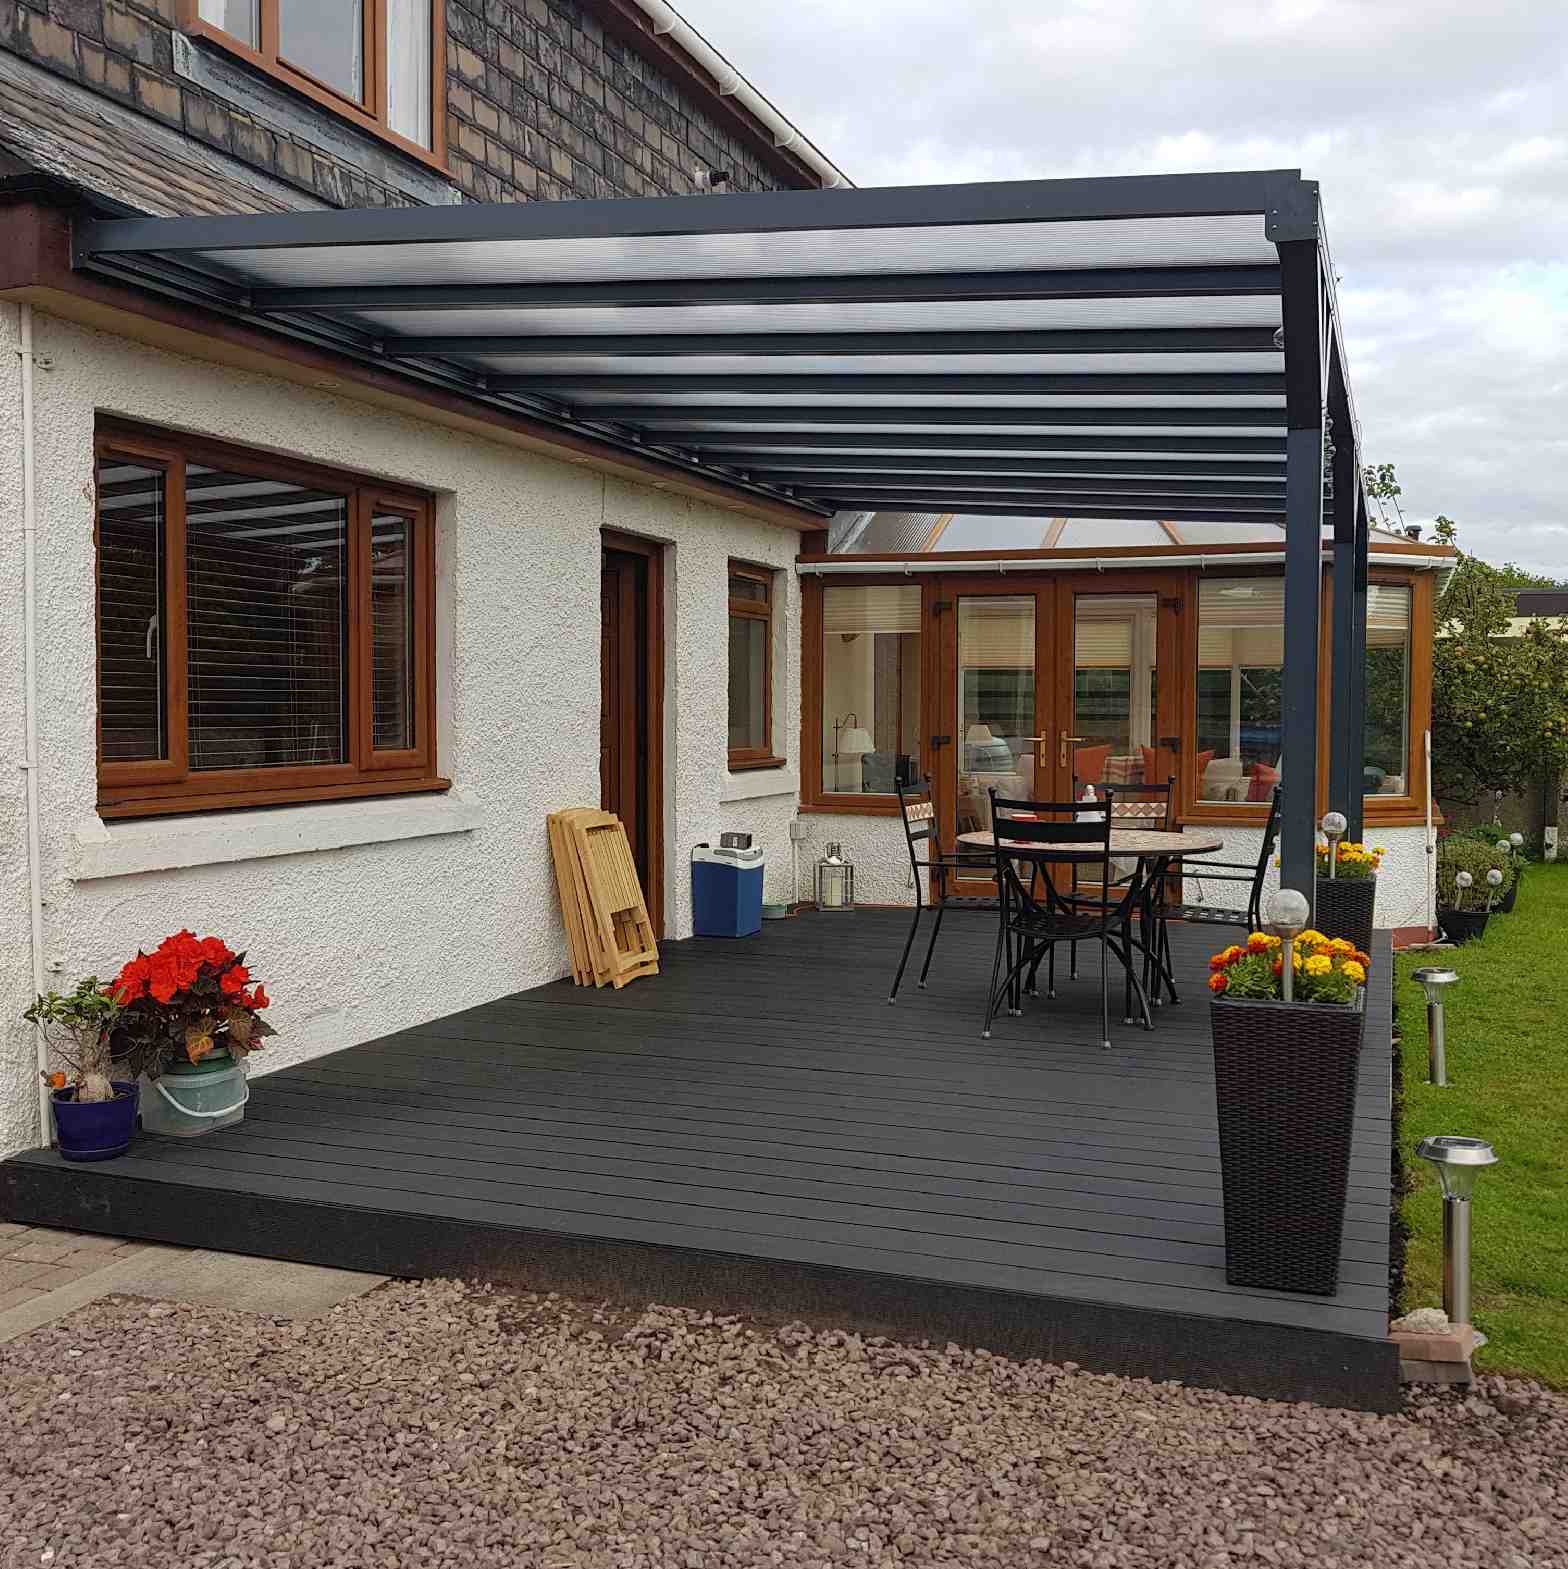 Buy Omega Verandah, Anthracite Grey, 16mm Polycarbonate Glazing - 10.6m (W) x 1.5m (P), (5) Supporting Posts online today